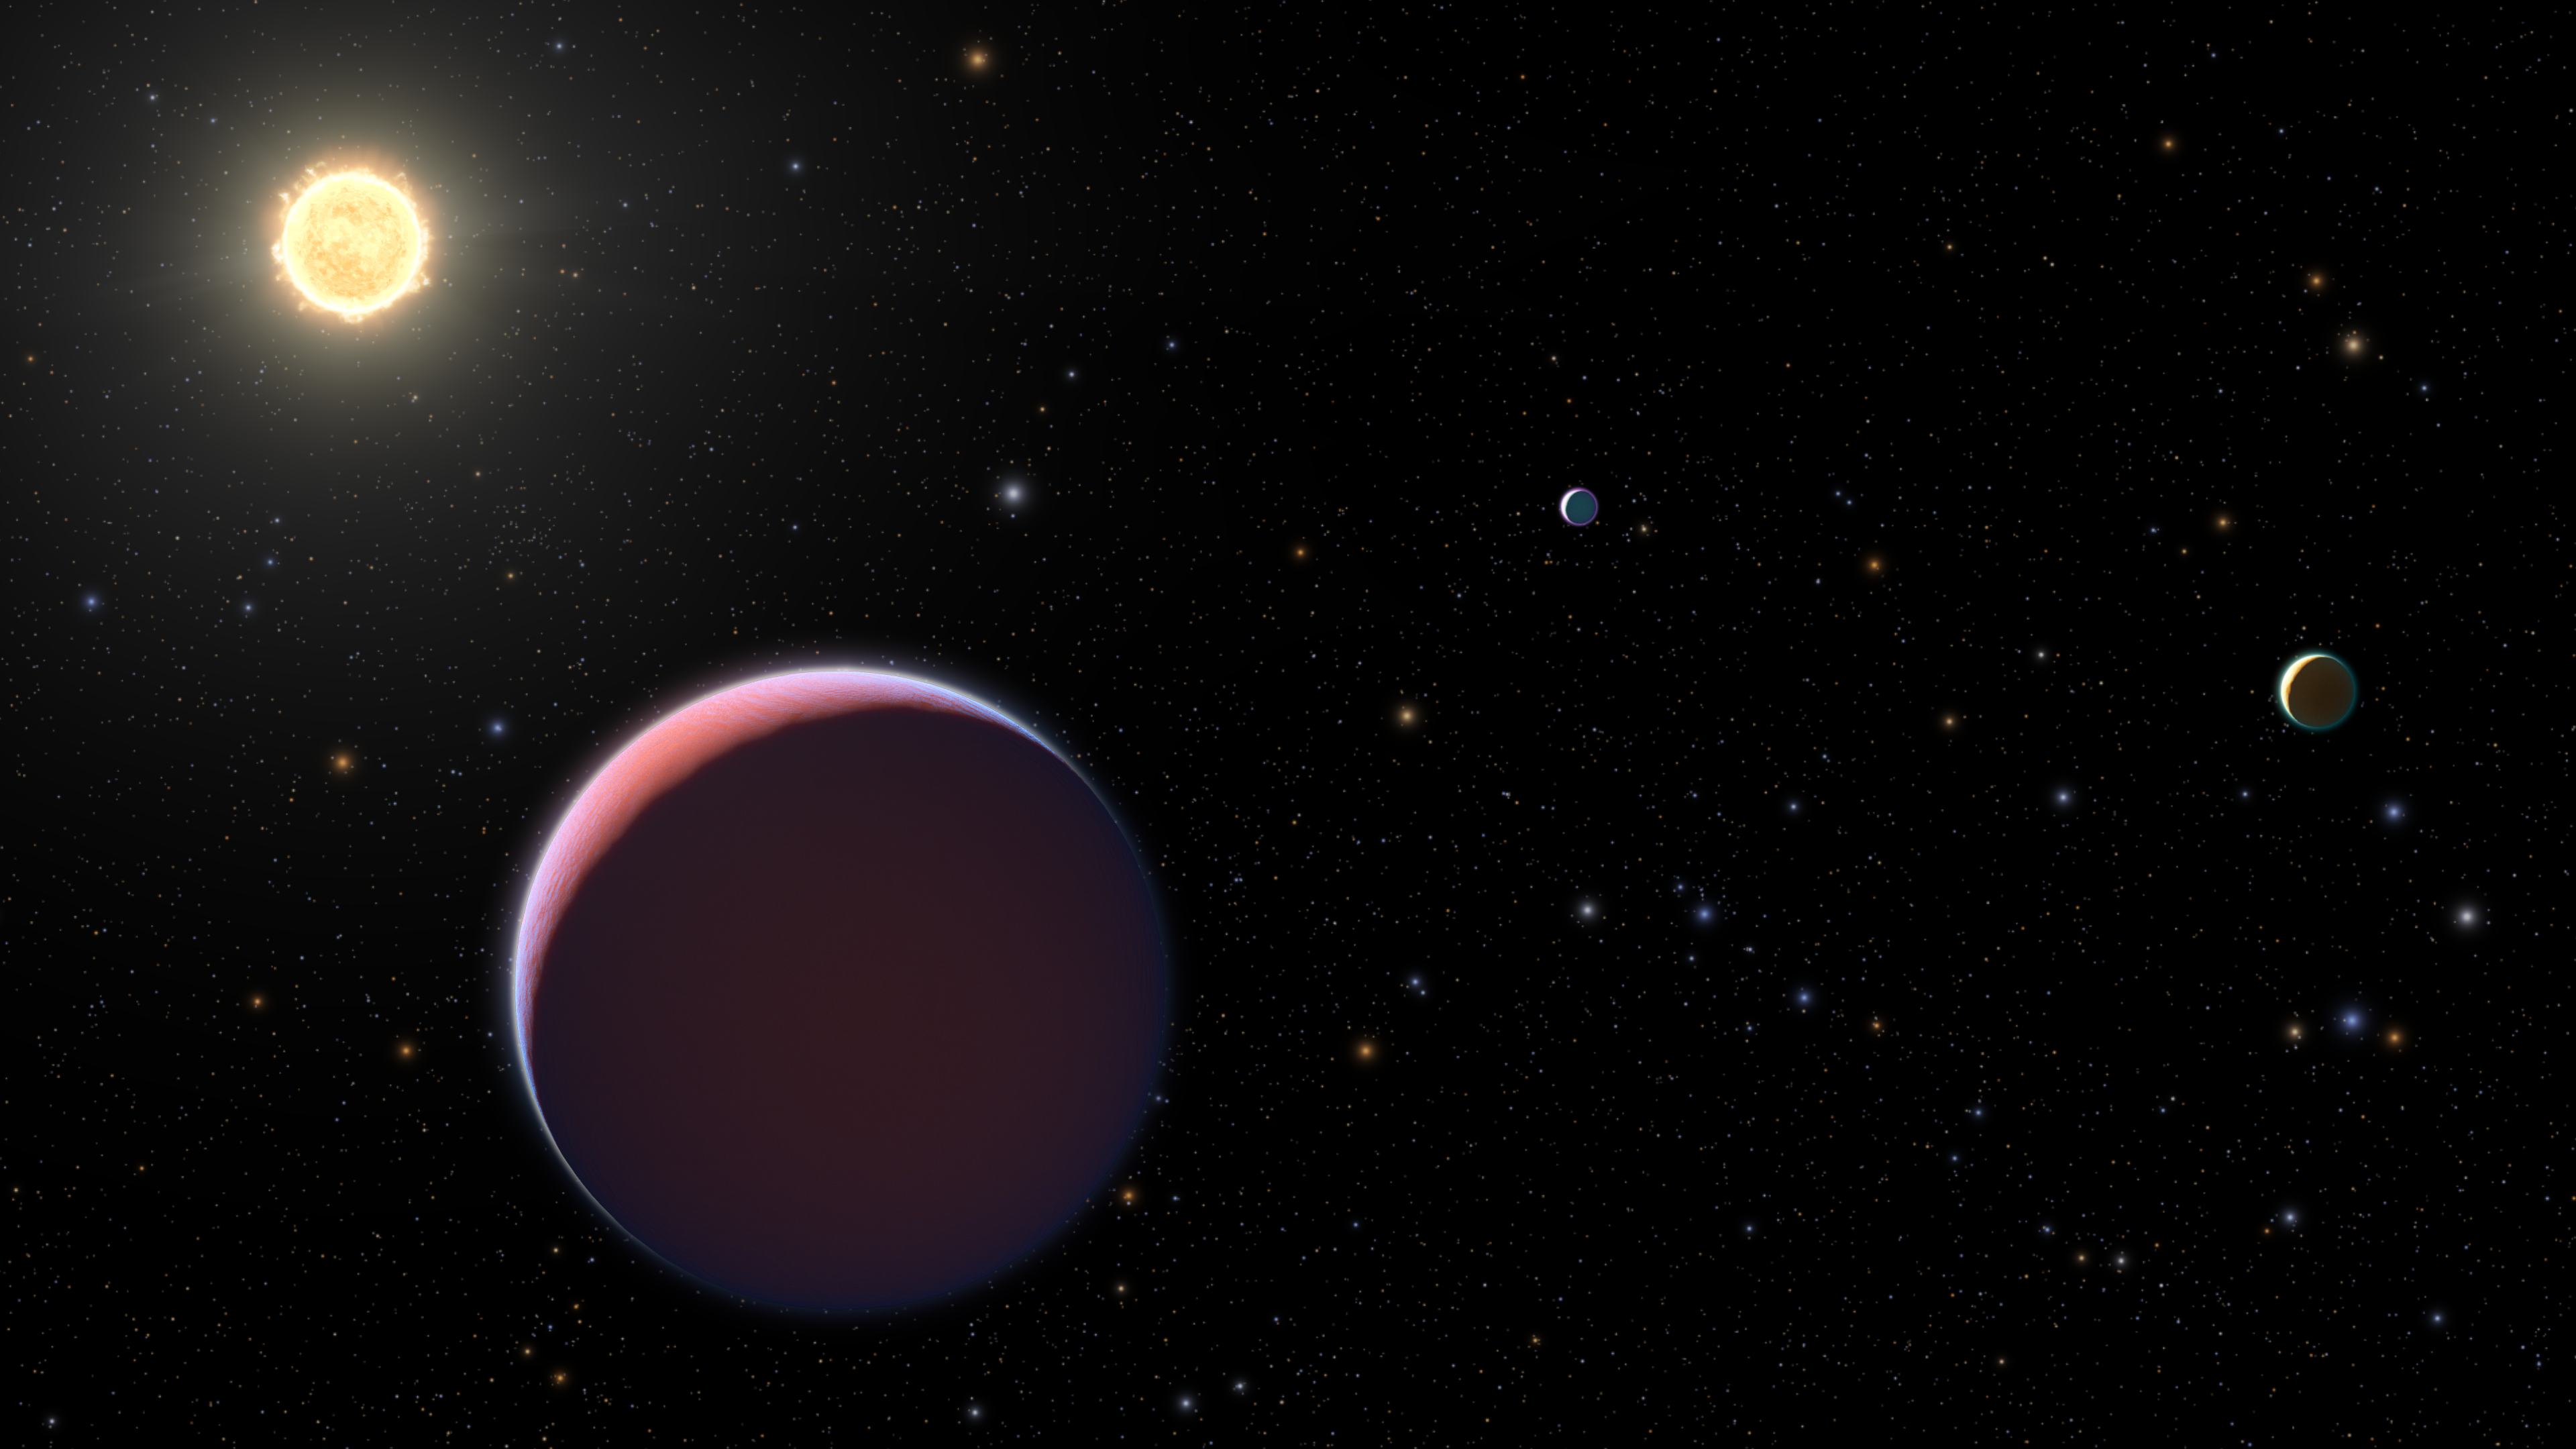 Illustration of a pinkish planet against a black background. Planet is in the foreground at lower left, its yellow star is some distance away at upper left. Two other planets, one blue the other yellow, are off to the right. Stars dot the background.